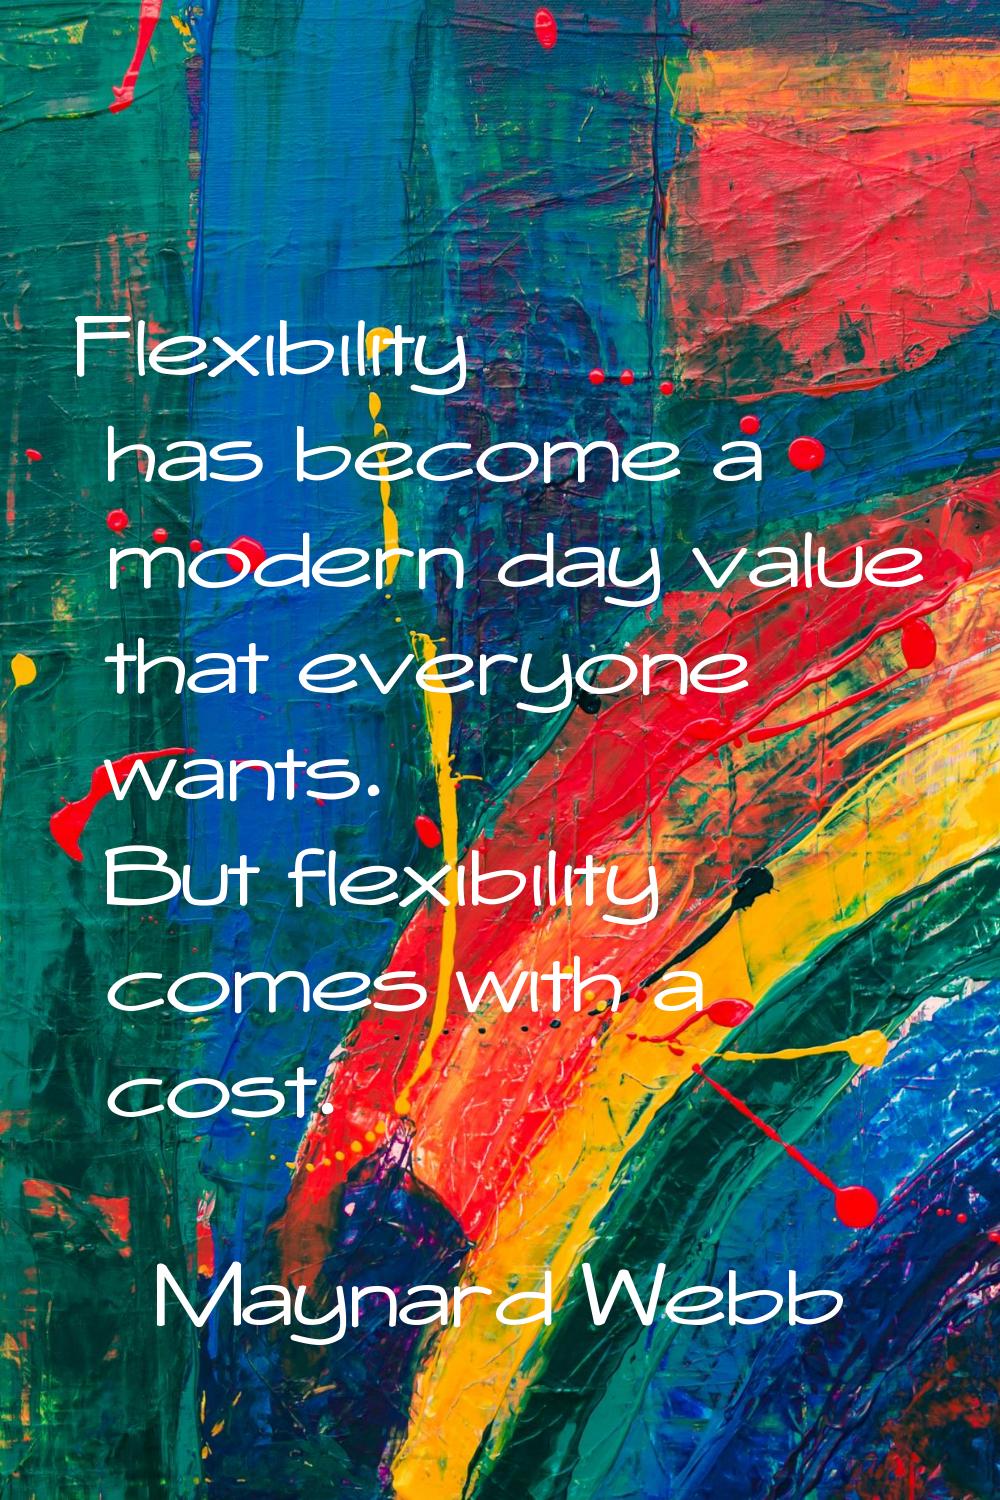 Flexibility has become a modern day value that everyone wants. But flexibility comes with a cost.